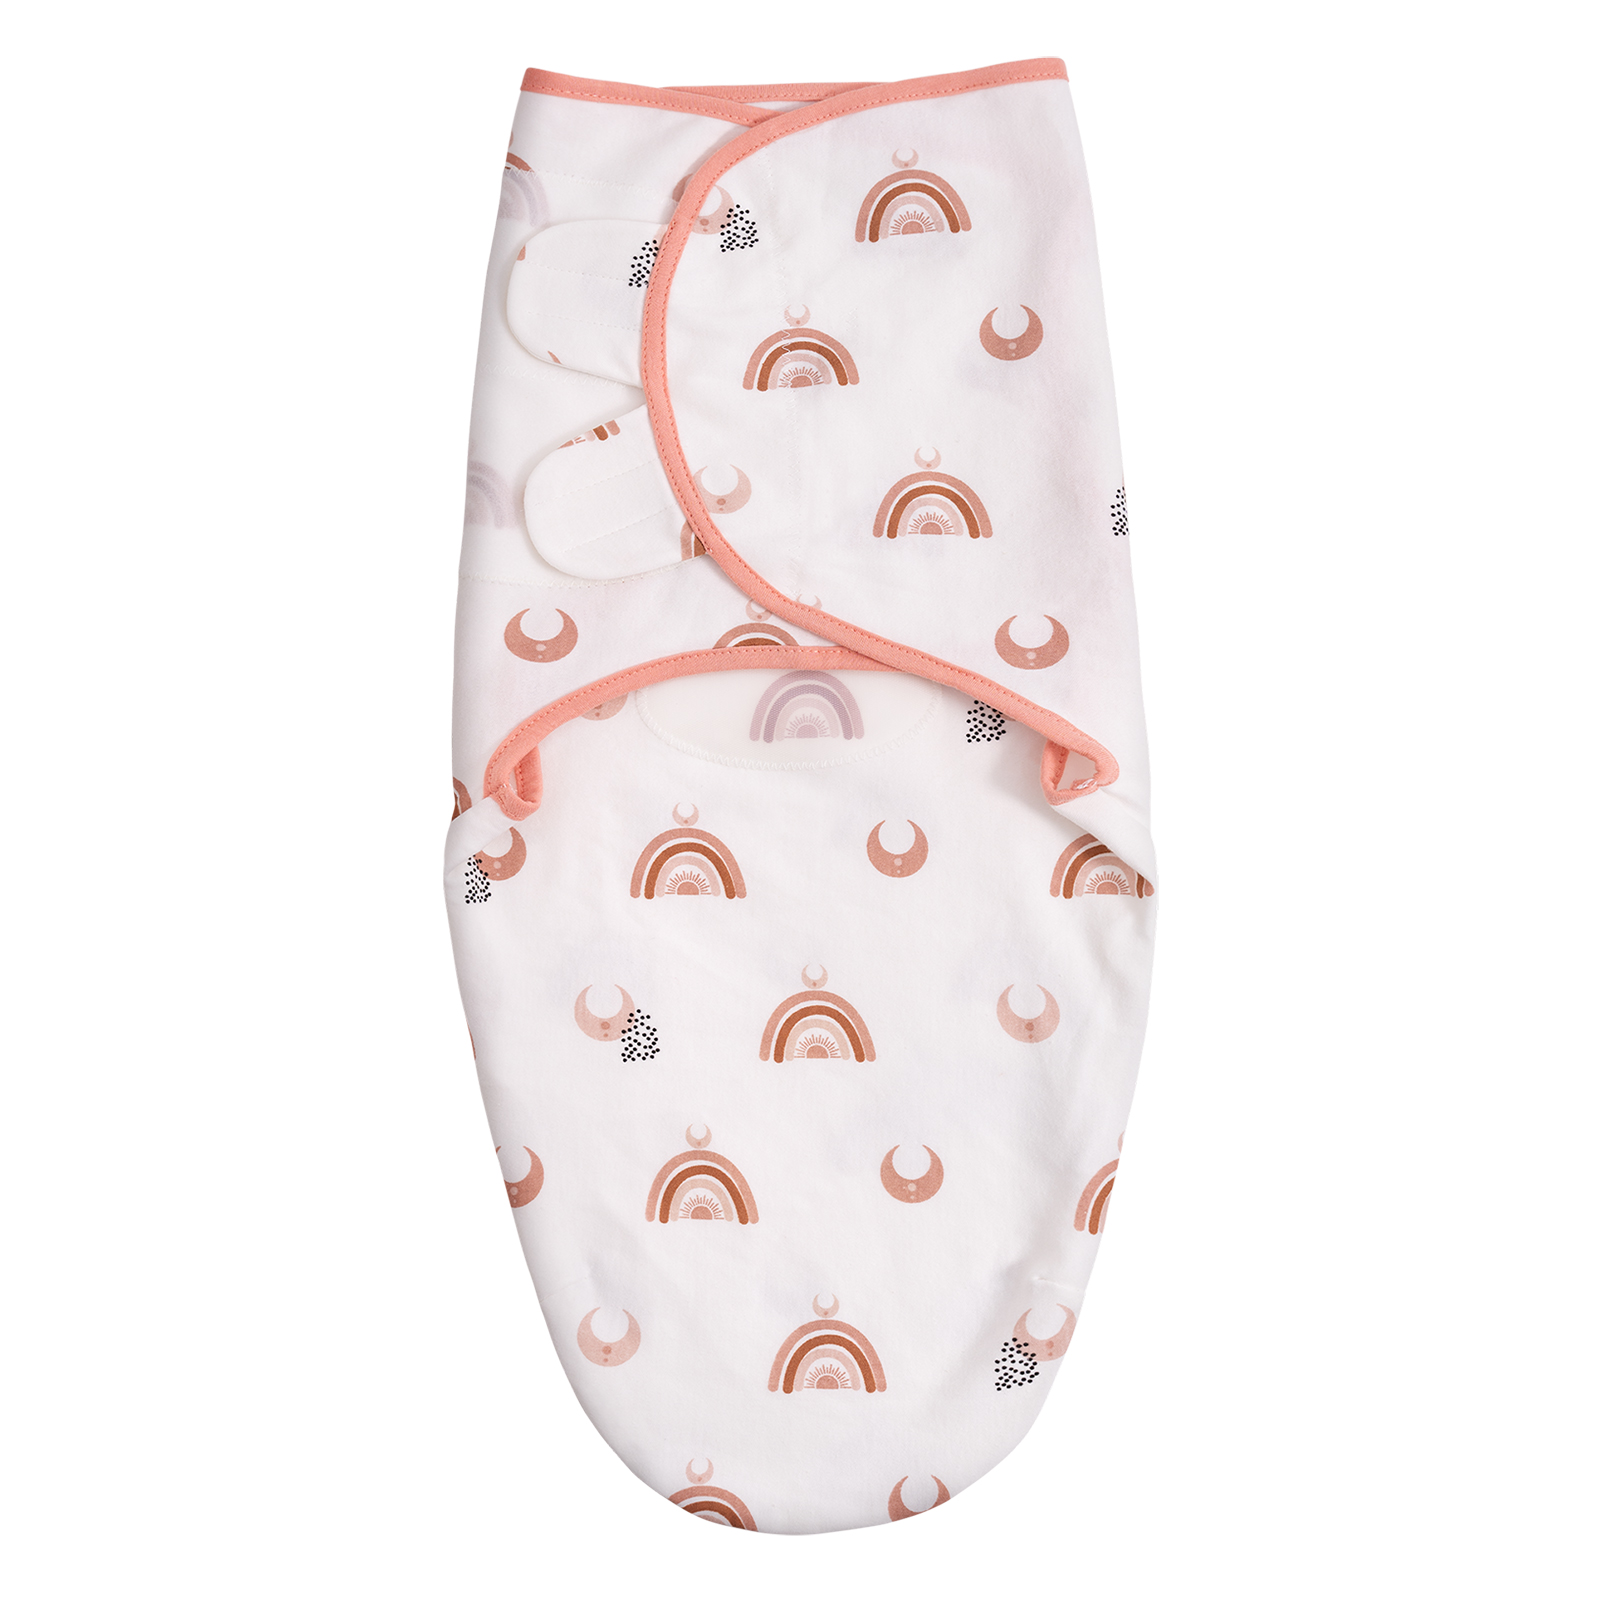 Rainbow | Gllquen Baby Swaddle 0-3 Months 1-Pack